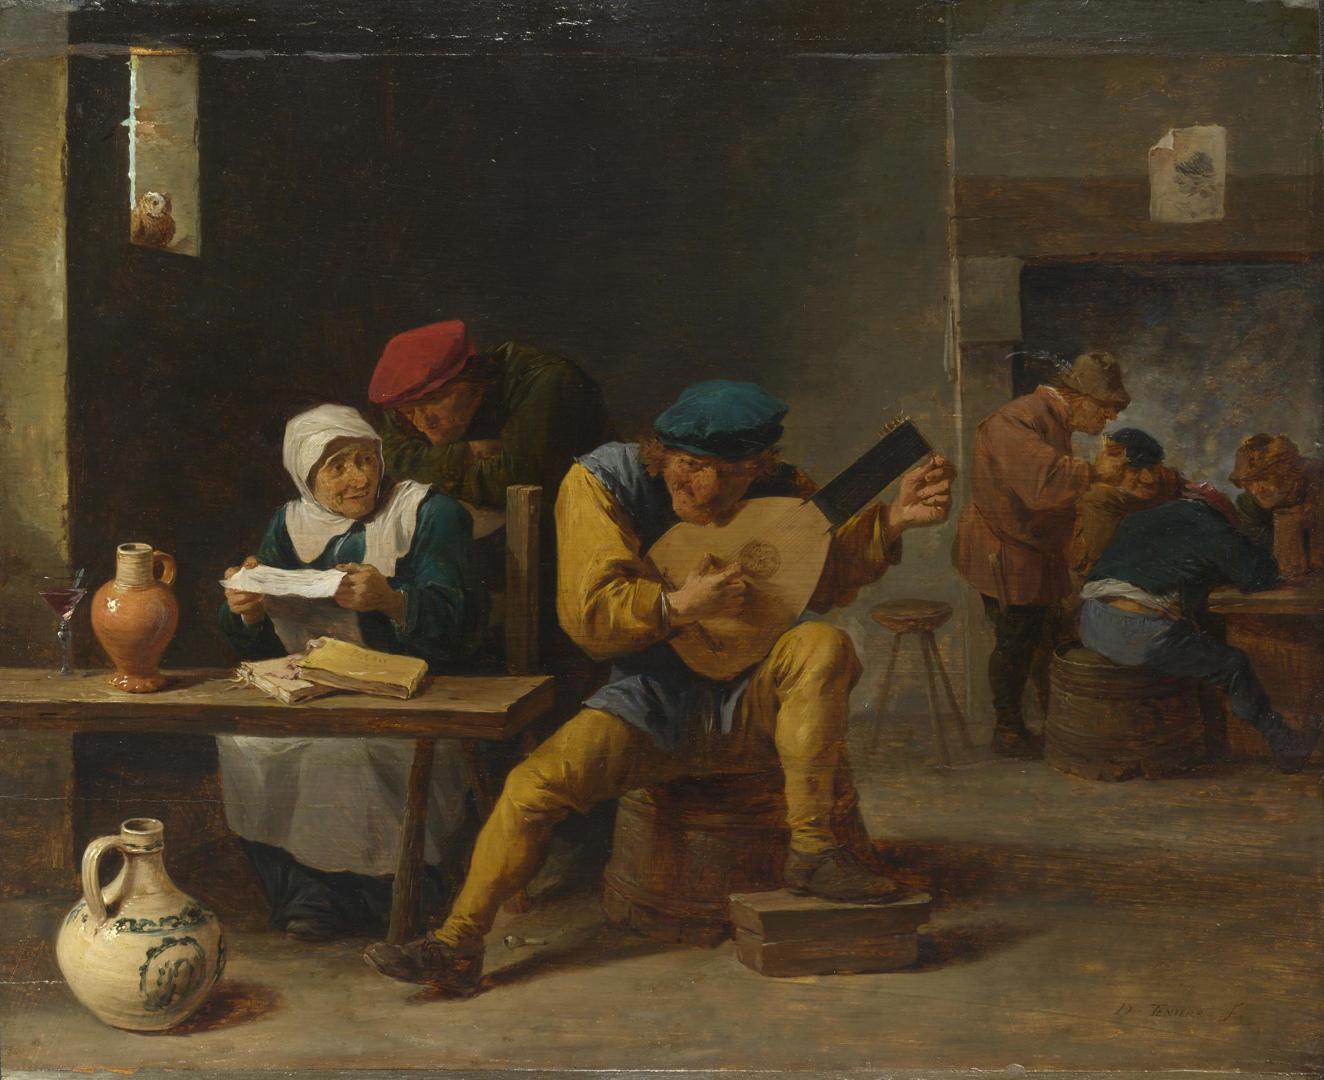 Peasants making Music in an Inn by Studio of David Teniers the Younger